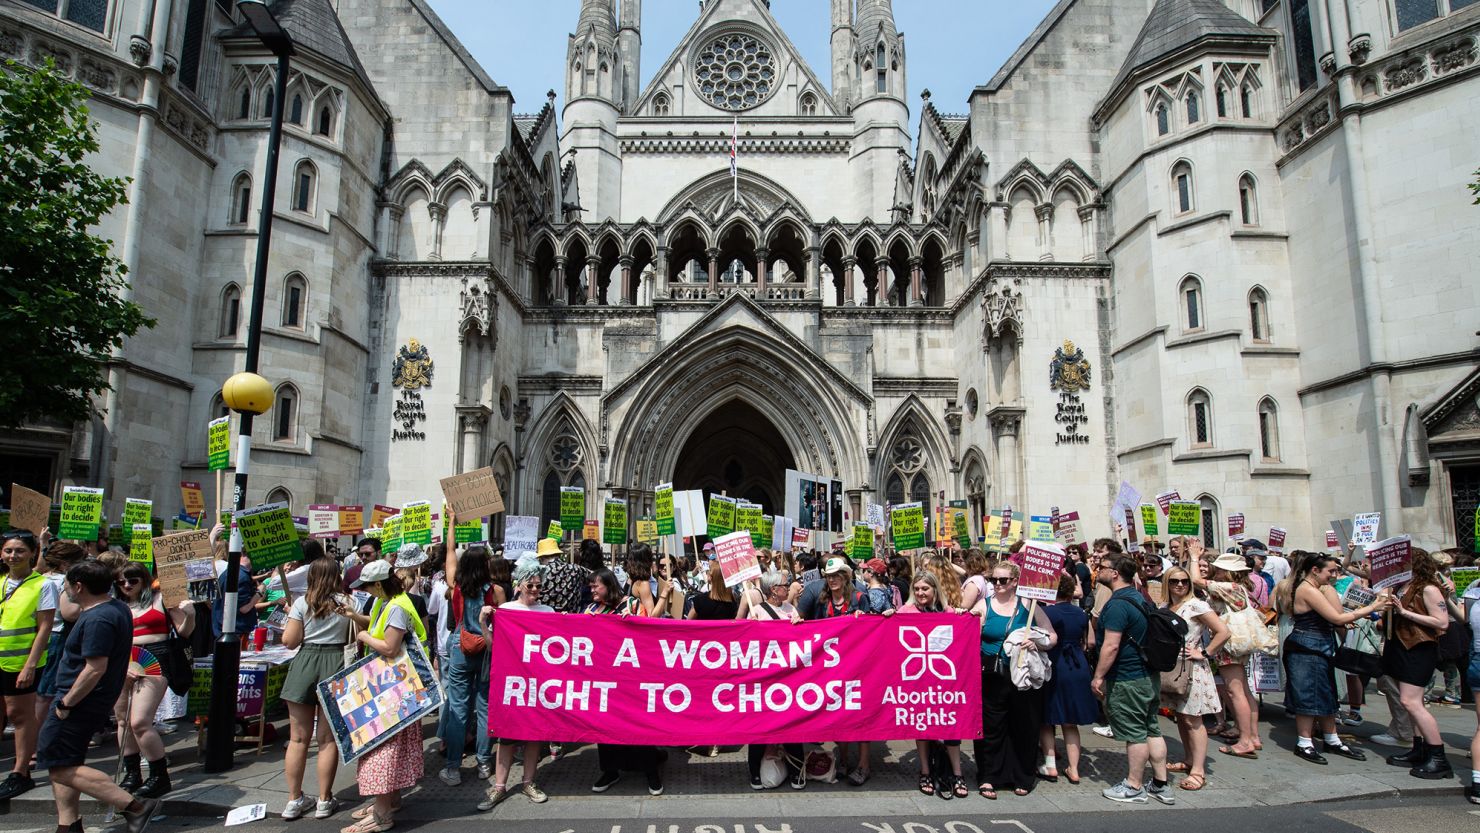 A British woman jailed in June for accessing abortion care past the UK's legal limit won her appeal and will be released from prison. The case sparked protests in London.